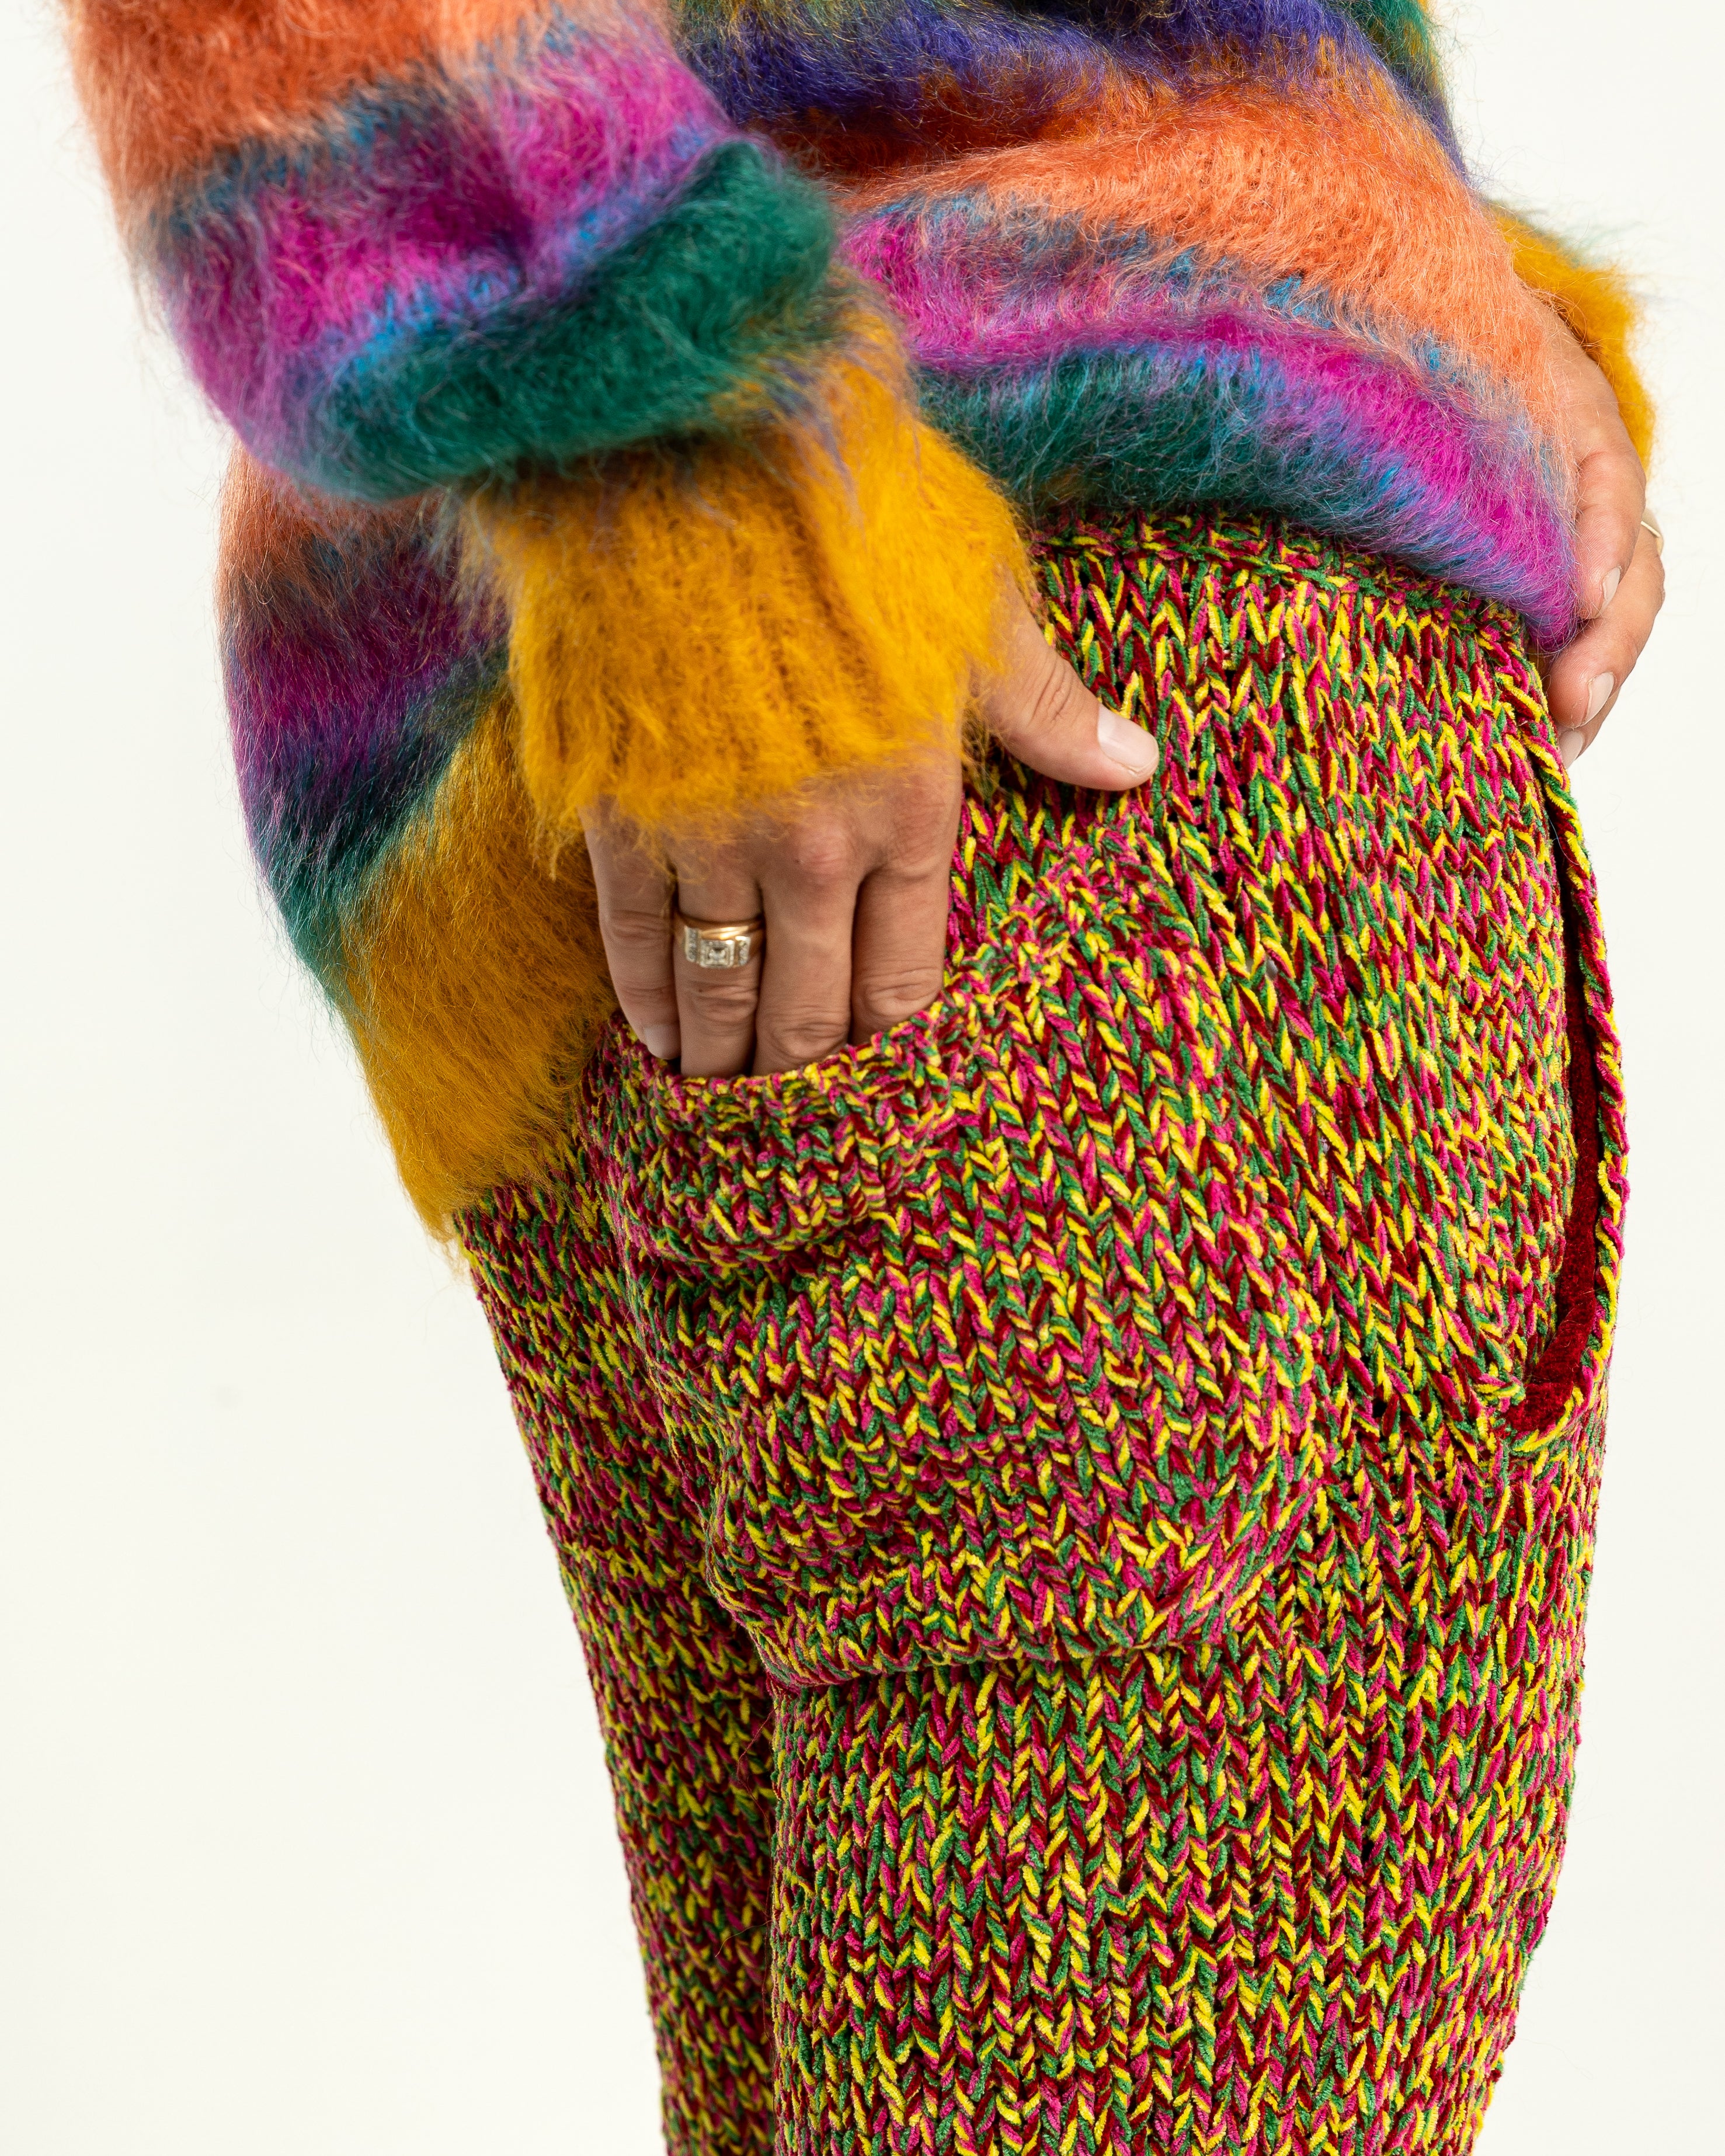 Knit Lounge Pant in Multi